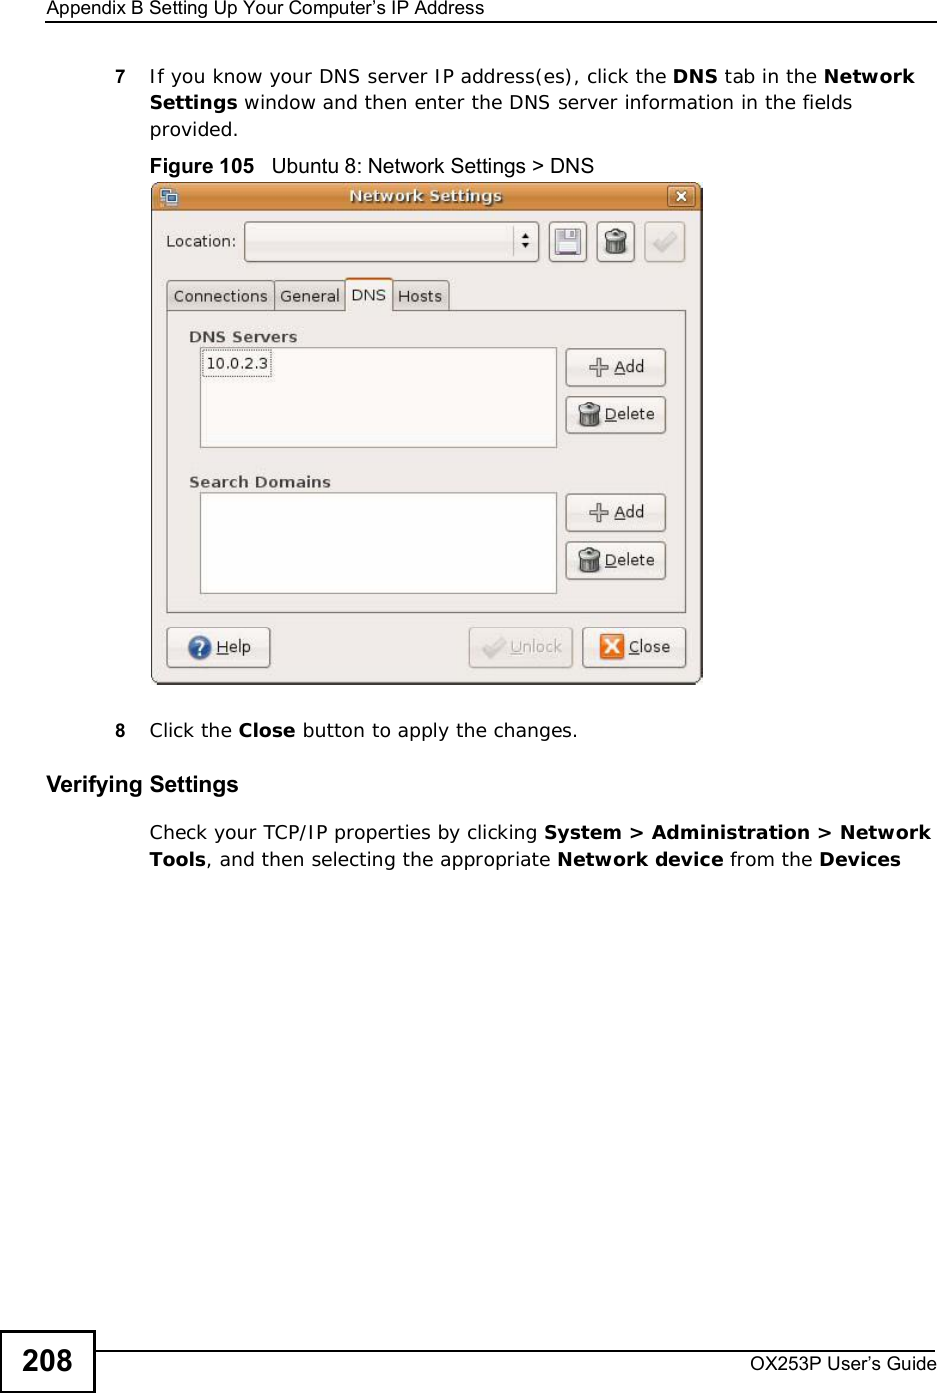 Appendix BSetting Up Your Computer’s IP AddressOX253P User’s Guide2087If you know your DNS server IP address(es), click the DNS tab in the Network Settings window and then enter the DNS server information in the fields provided. Figure 105   Ubuntu 8: Network Settings &gt; DNS  8Click the Close button to apply the changes.Verifying SettingsCheck your TCP/IP properties by clicking System &gt; Administration &gt; Network Tools, and then selecting the appropriate Network device from the Devices